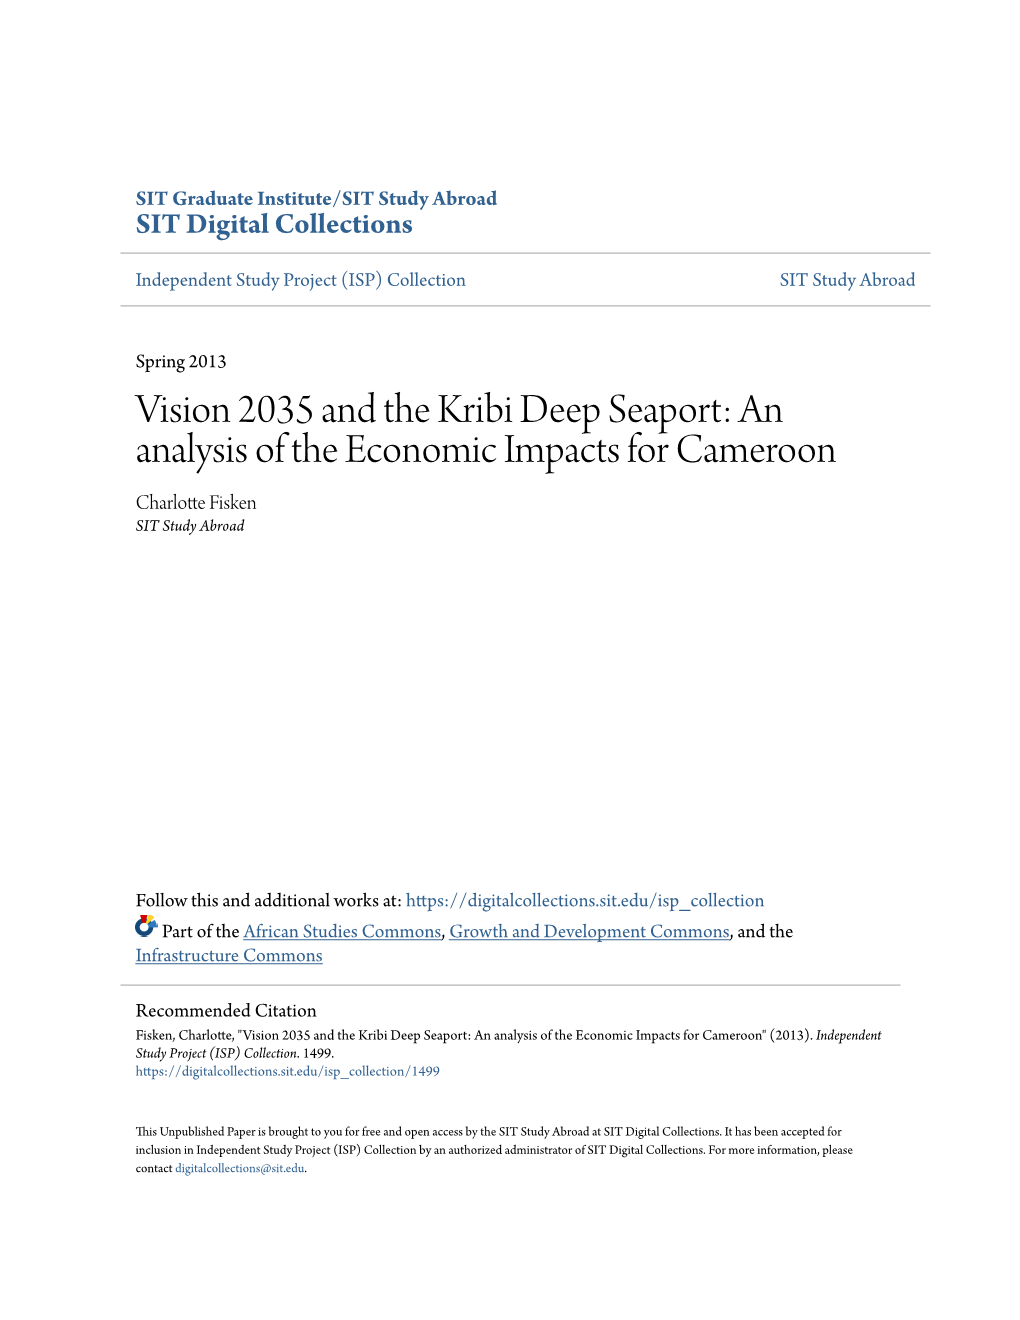 Vision 2035 and the Kribi Deep Seaport: an Analysis of the Economic Impacts for Cameroon Charlotte Fisken SIT Study Abroad